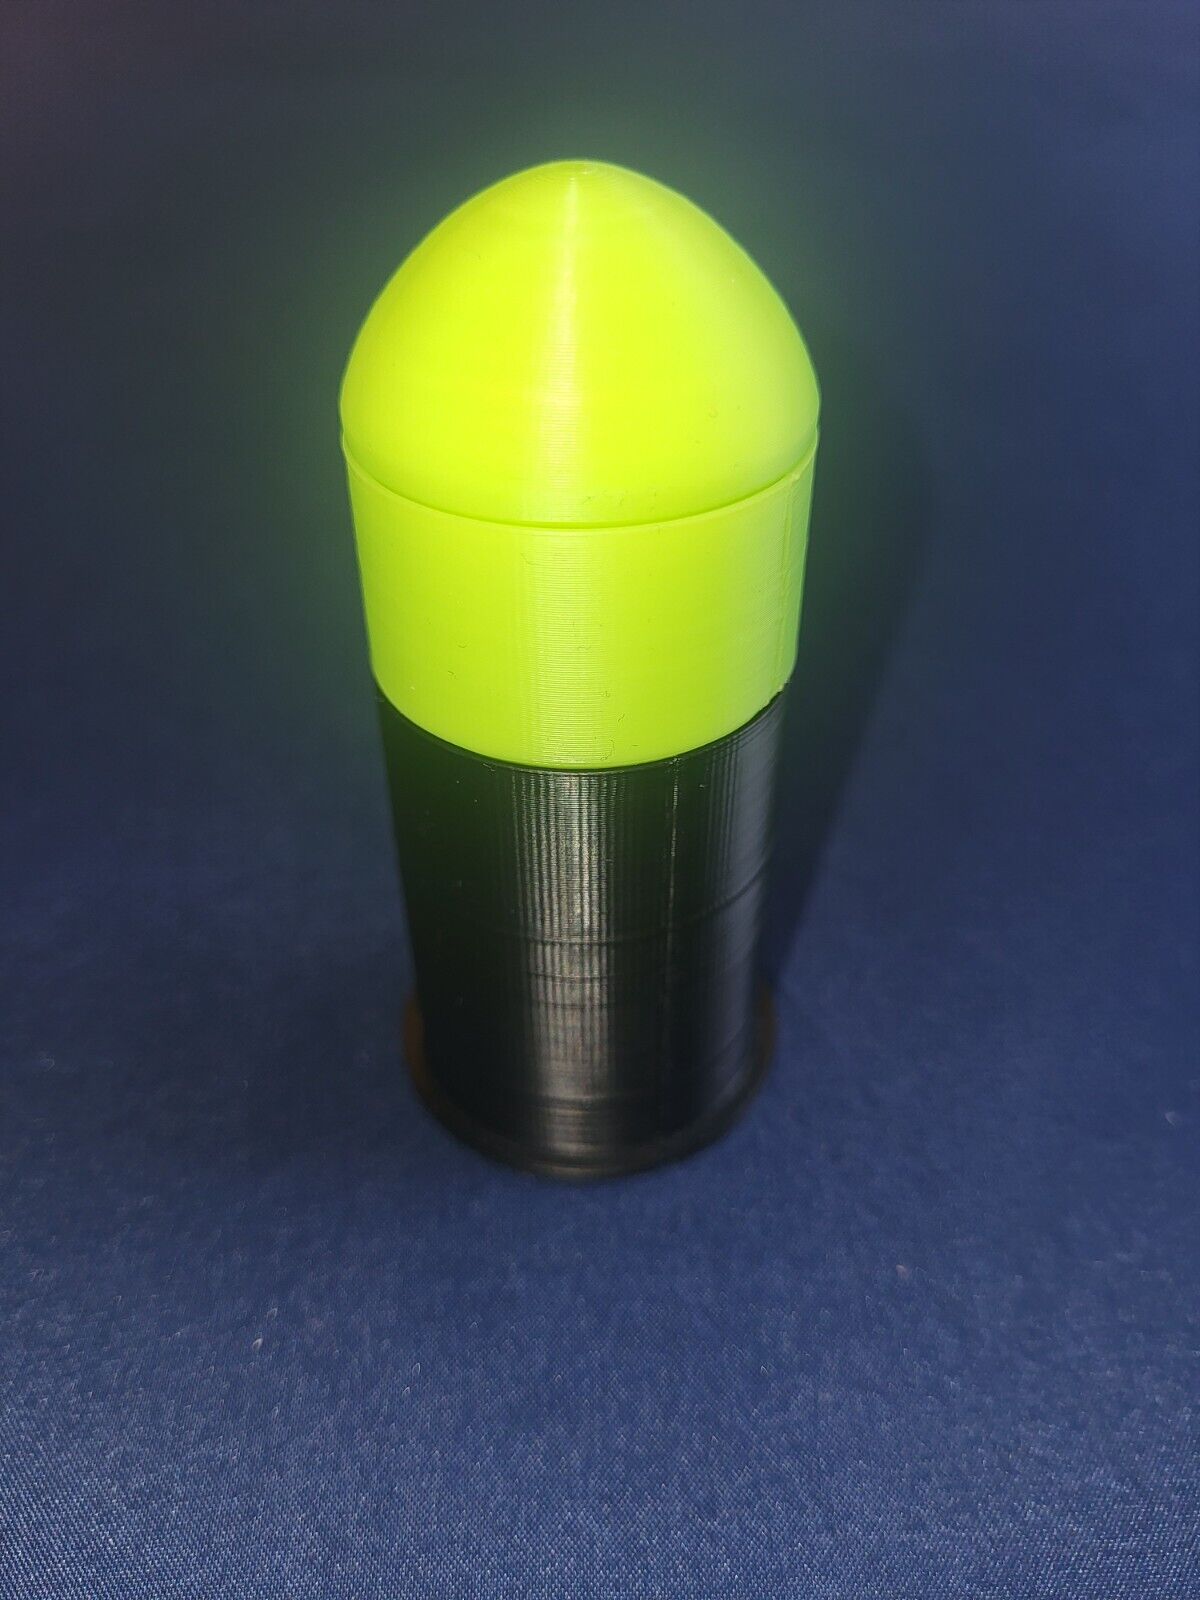 37mm payload projectile complete kit. Neon green